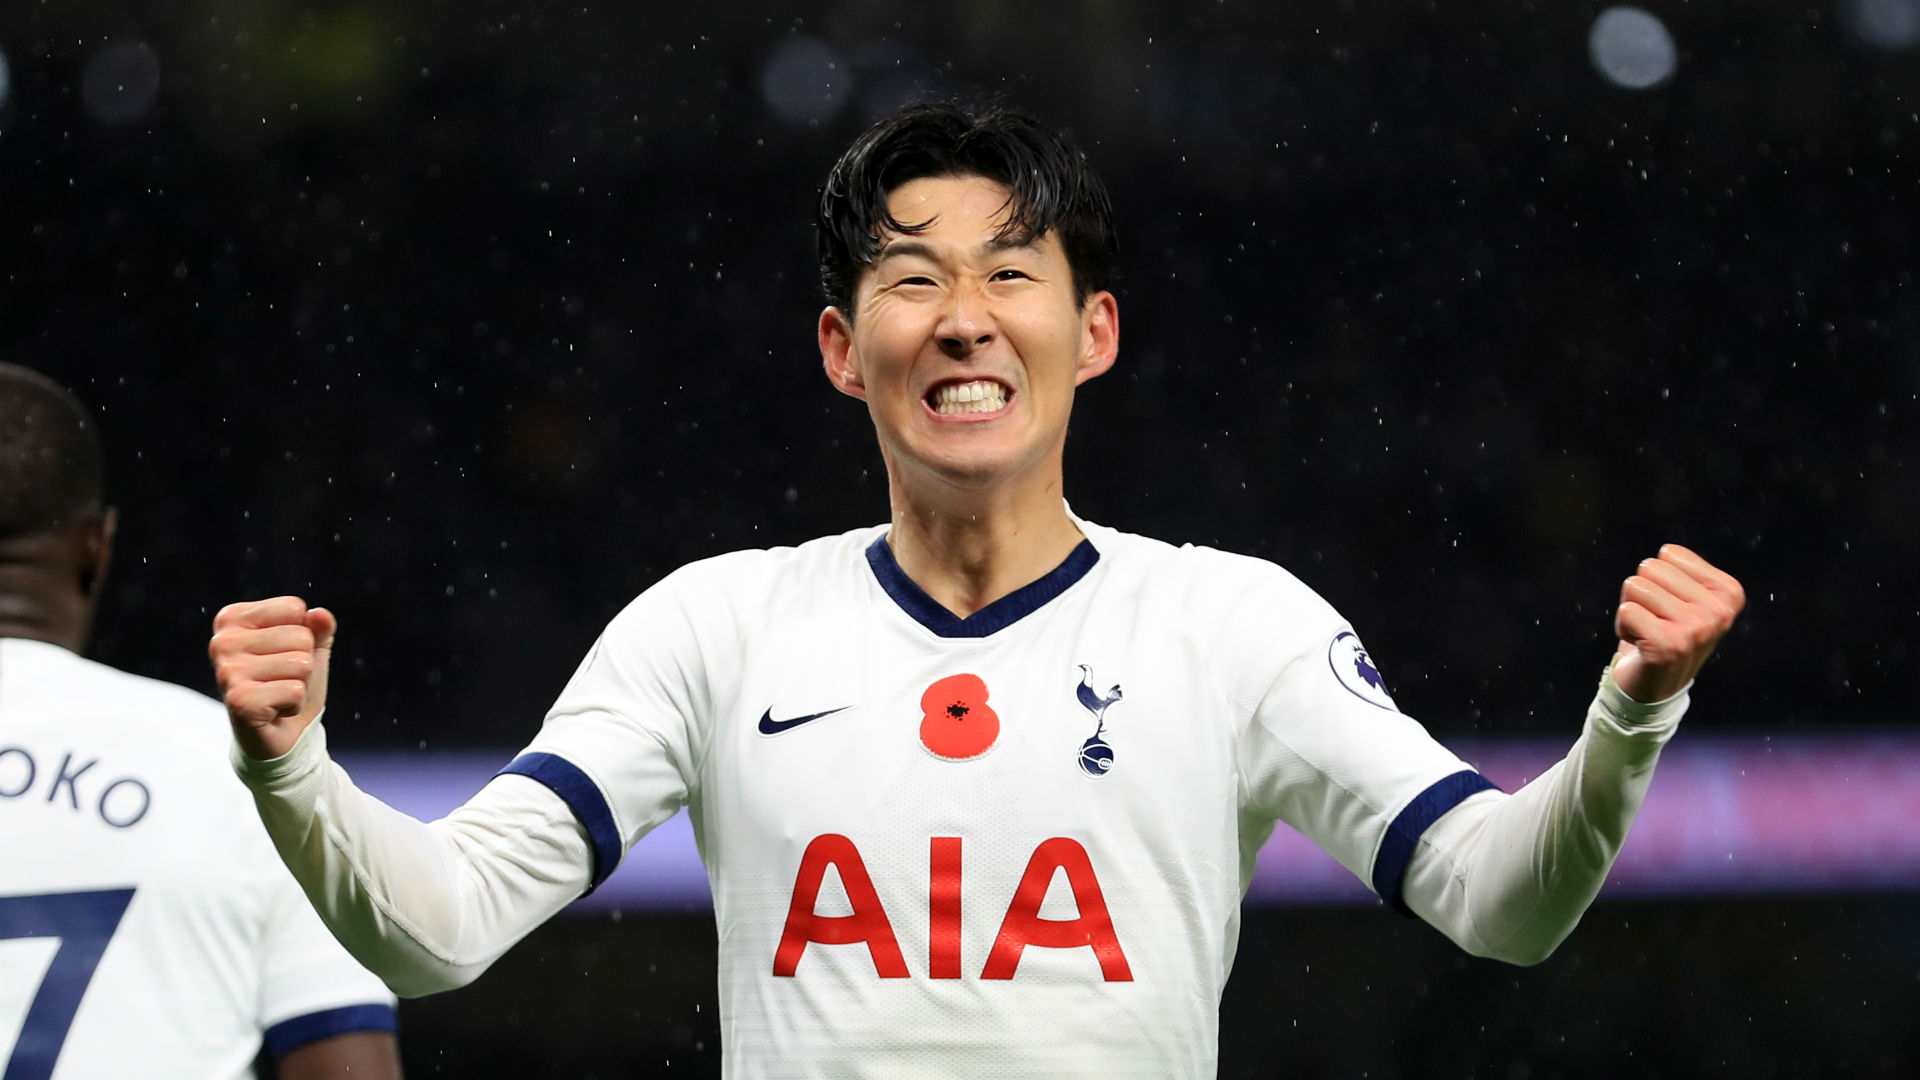 Tottenham face a battle to secure a top-four Premier League finish, with Son Heung-min issuing a rallying cry to his team-mates.